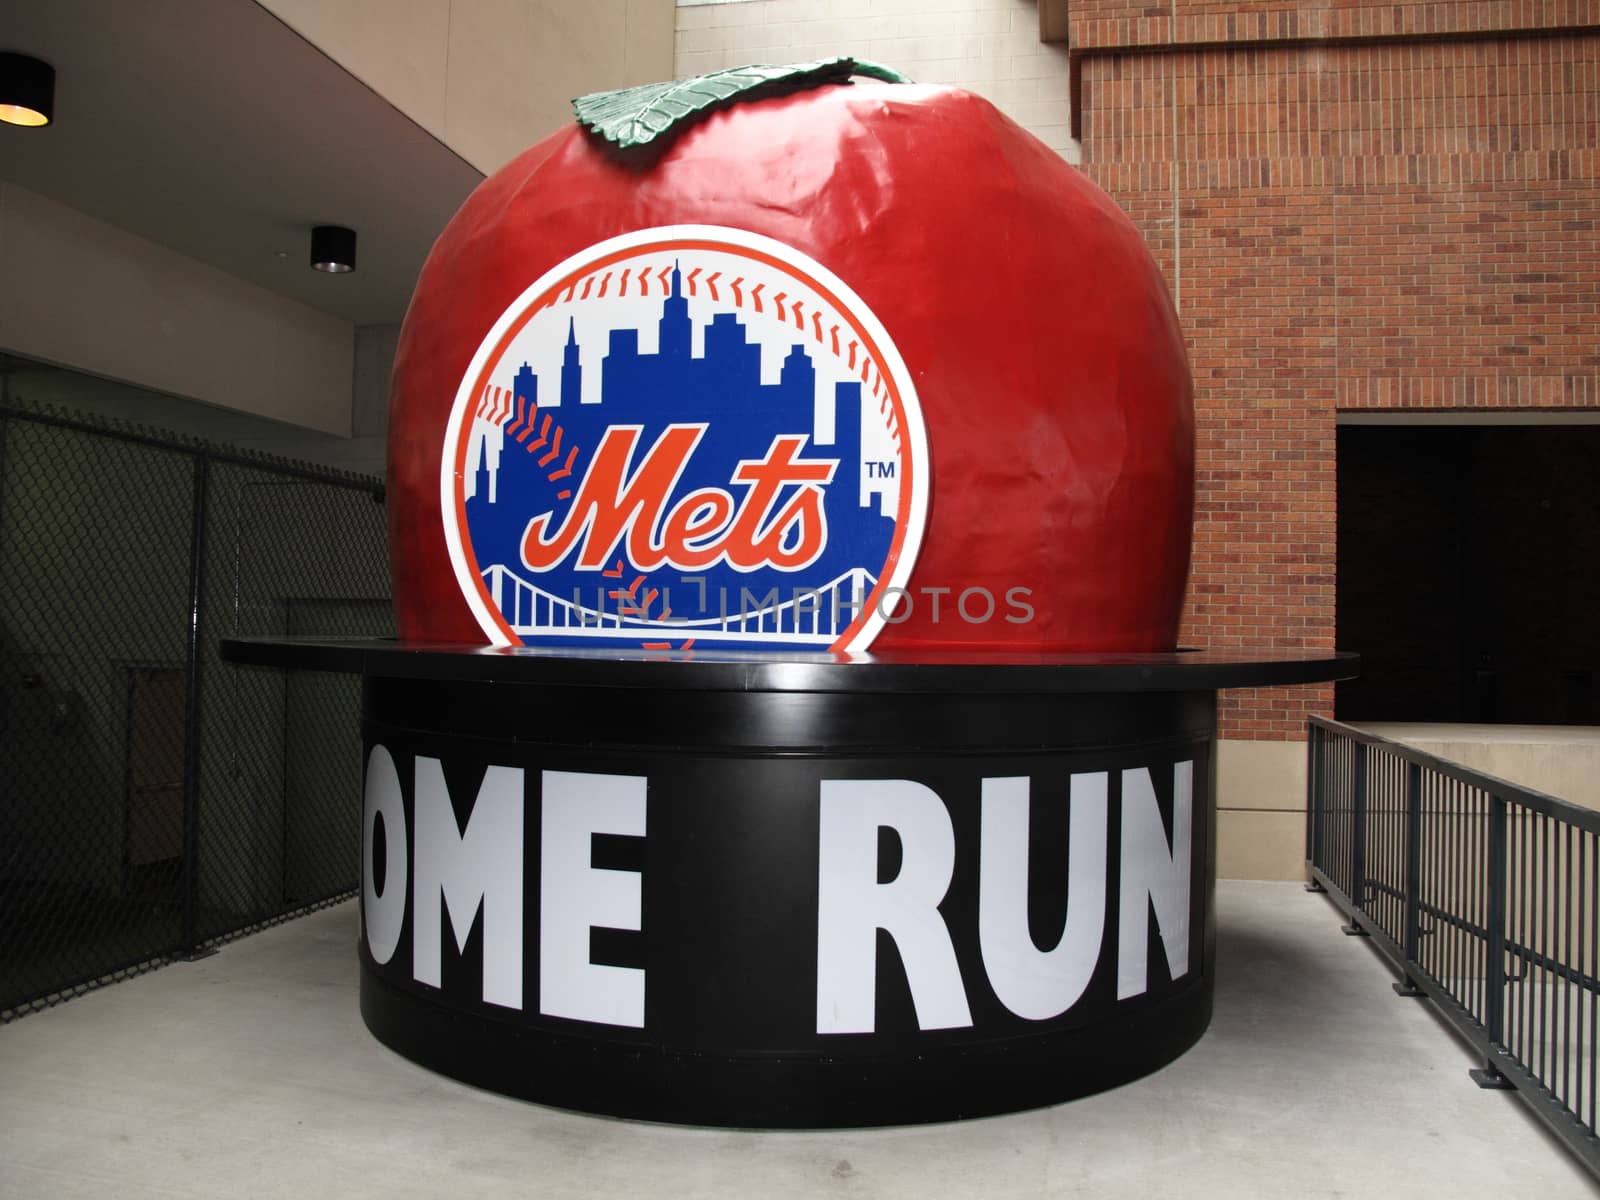 New York Mets famous Home Run Apple carried over to Citi Field from Shea Stadium